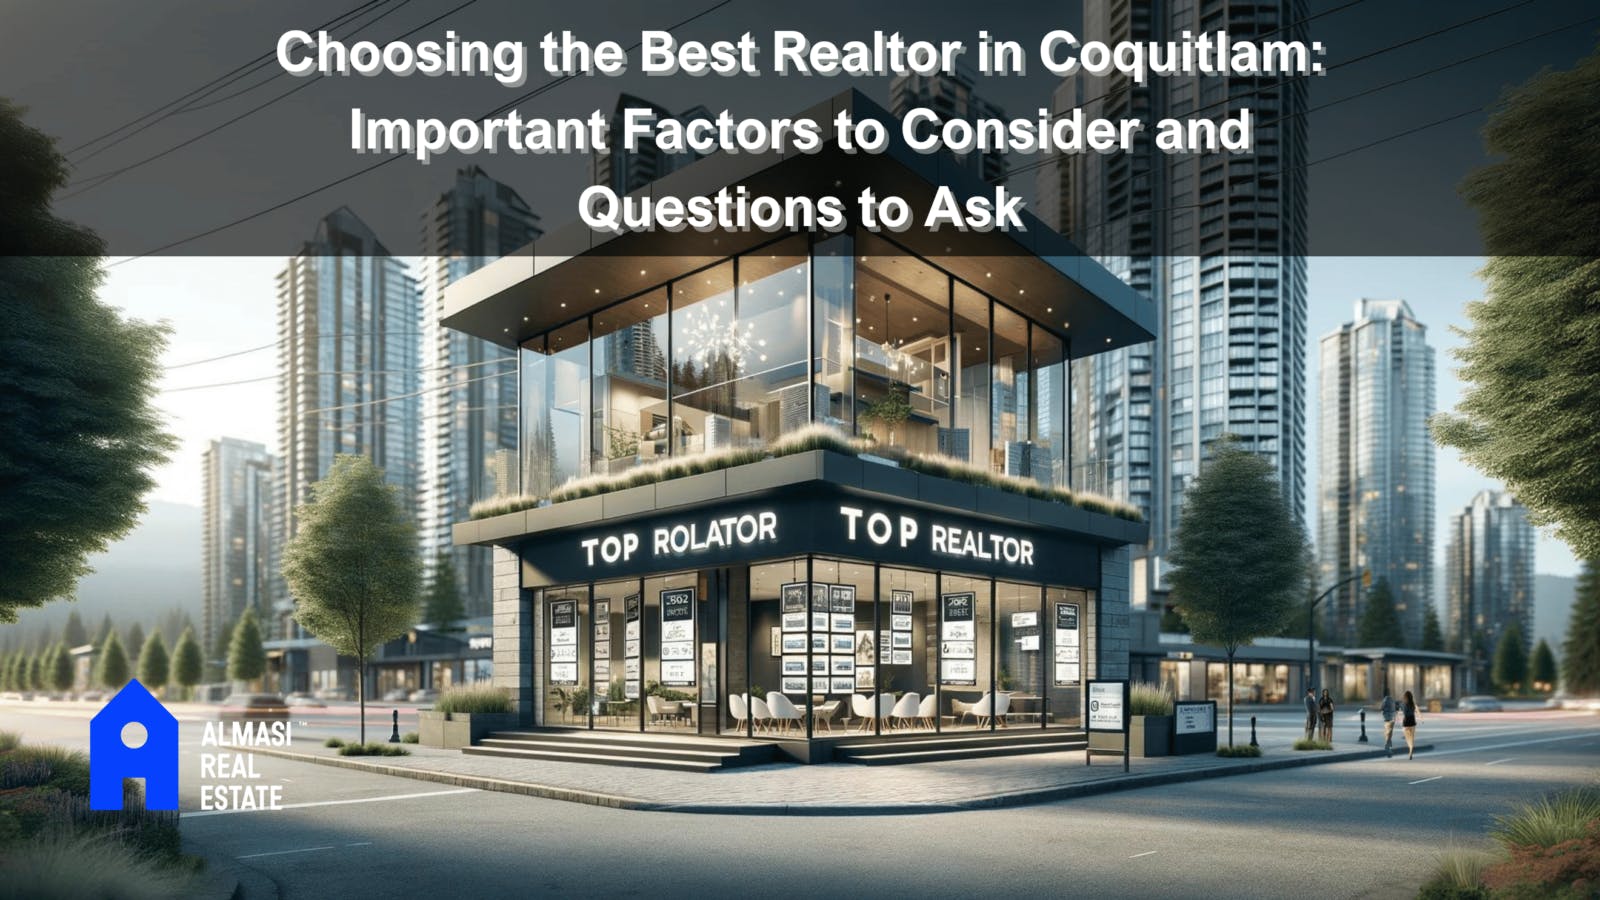 Choosing the Best Realtor in Coquitlam: Important Factors to Consider and Questions to Ask